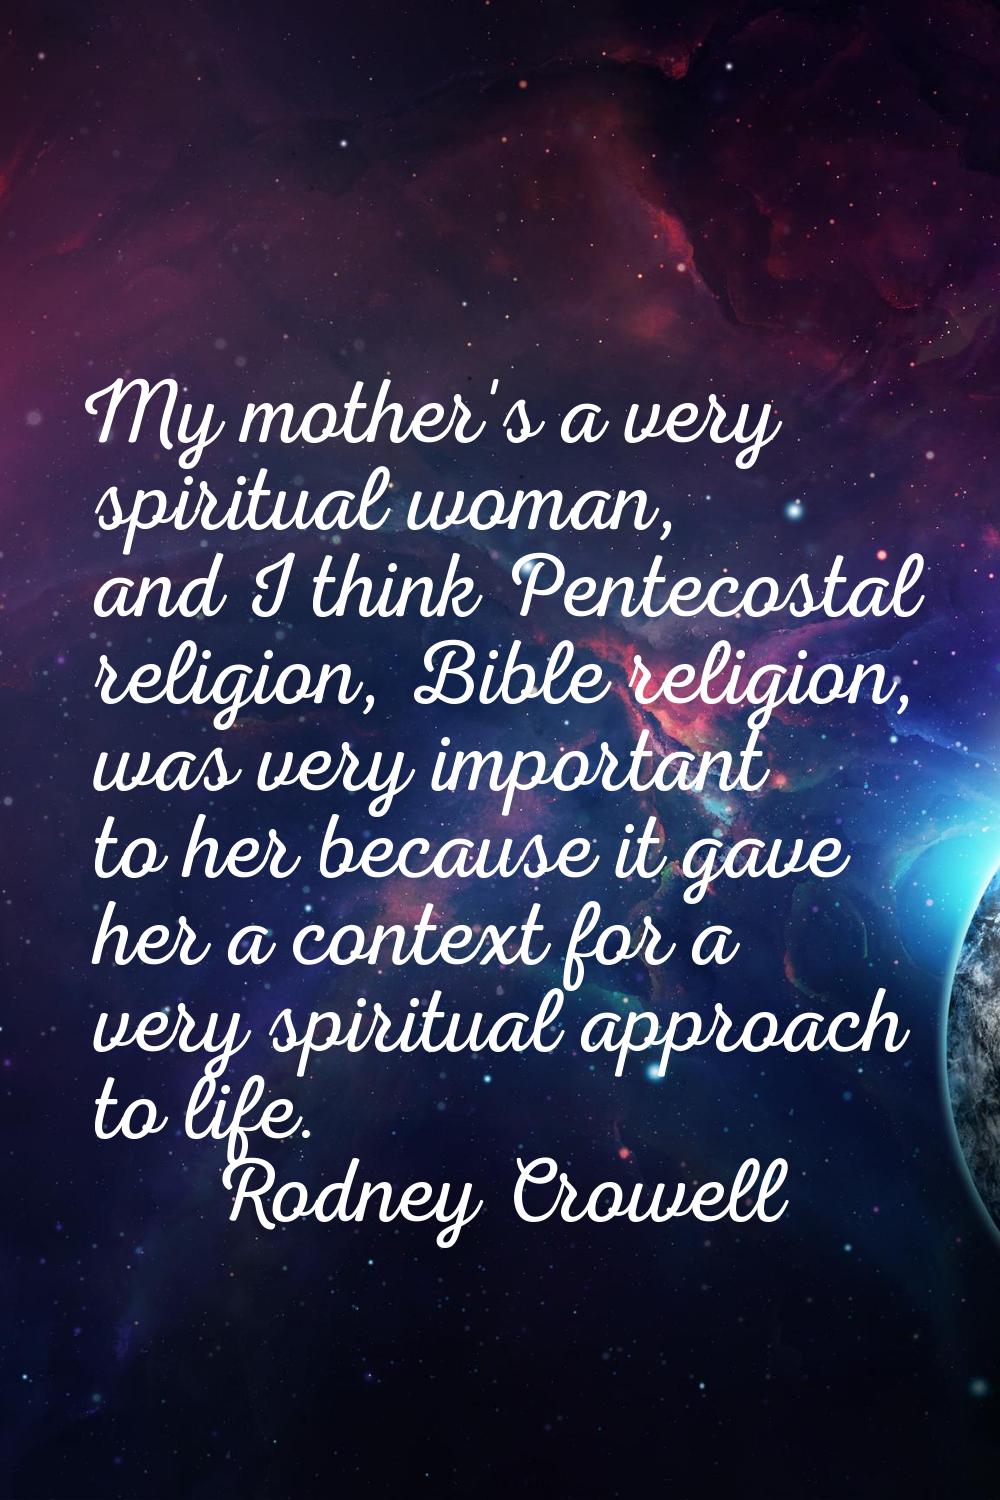 My mother's a very spiritual woman, and I think Pentecostal religion, Bible religion, was very impo